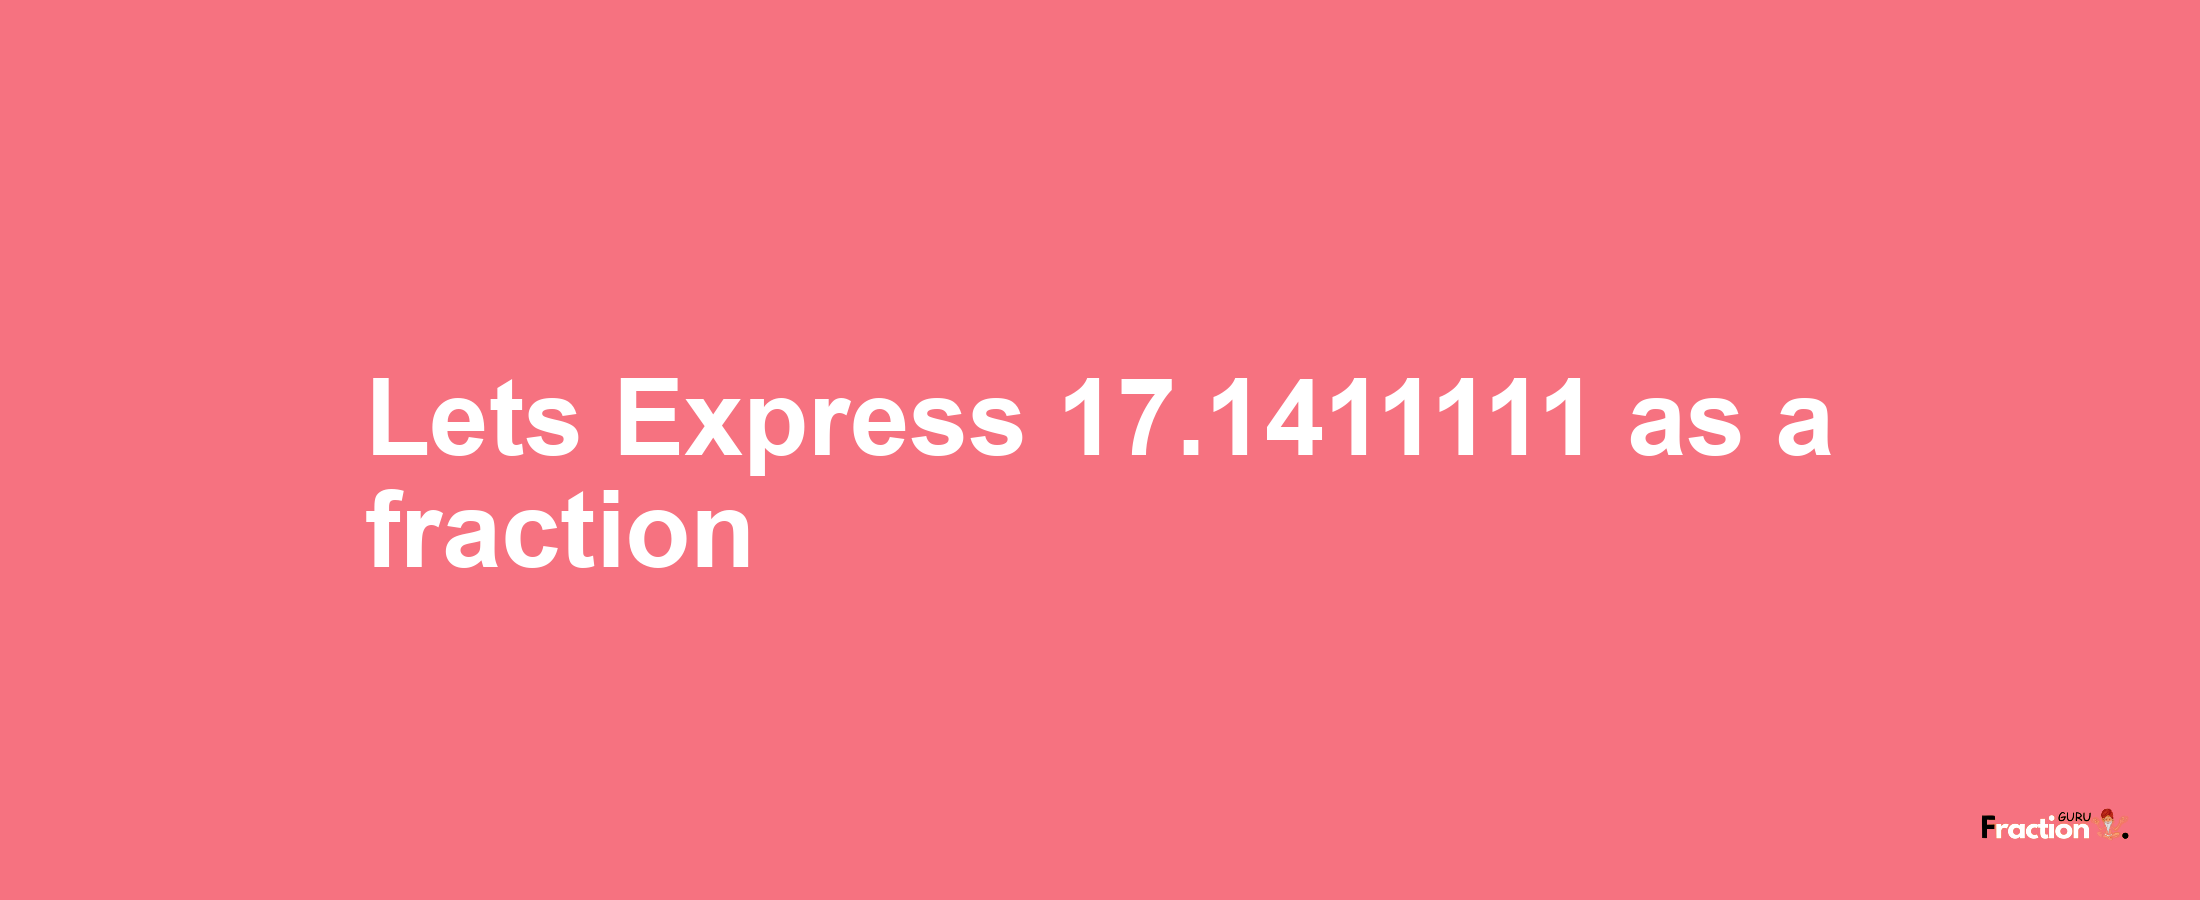 Lets Express 17.1411111 as afraction